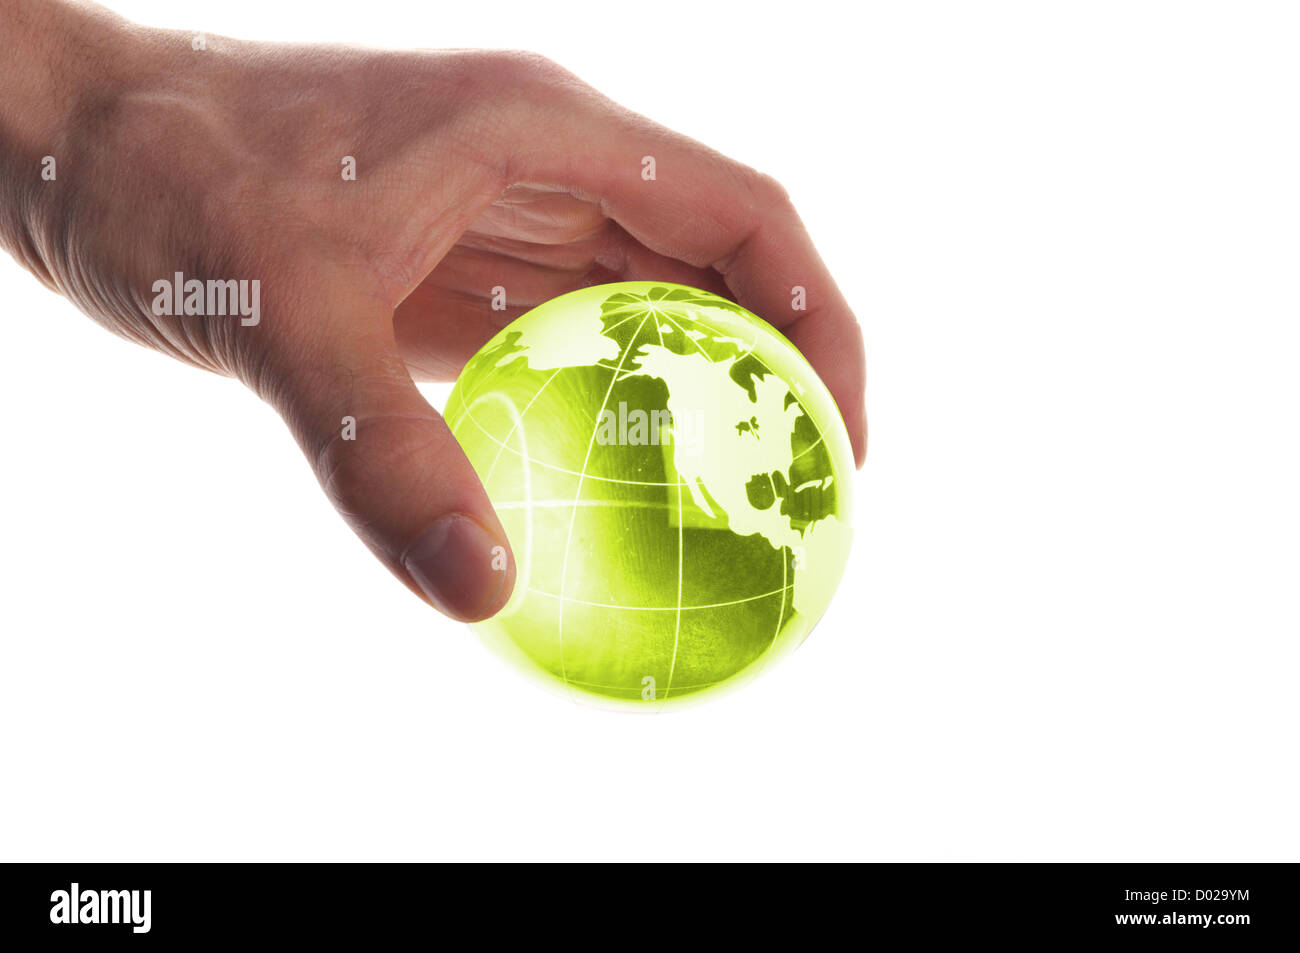 hand holding globe to protect the fragile environment Stock Photo